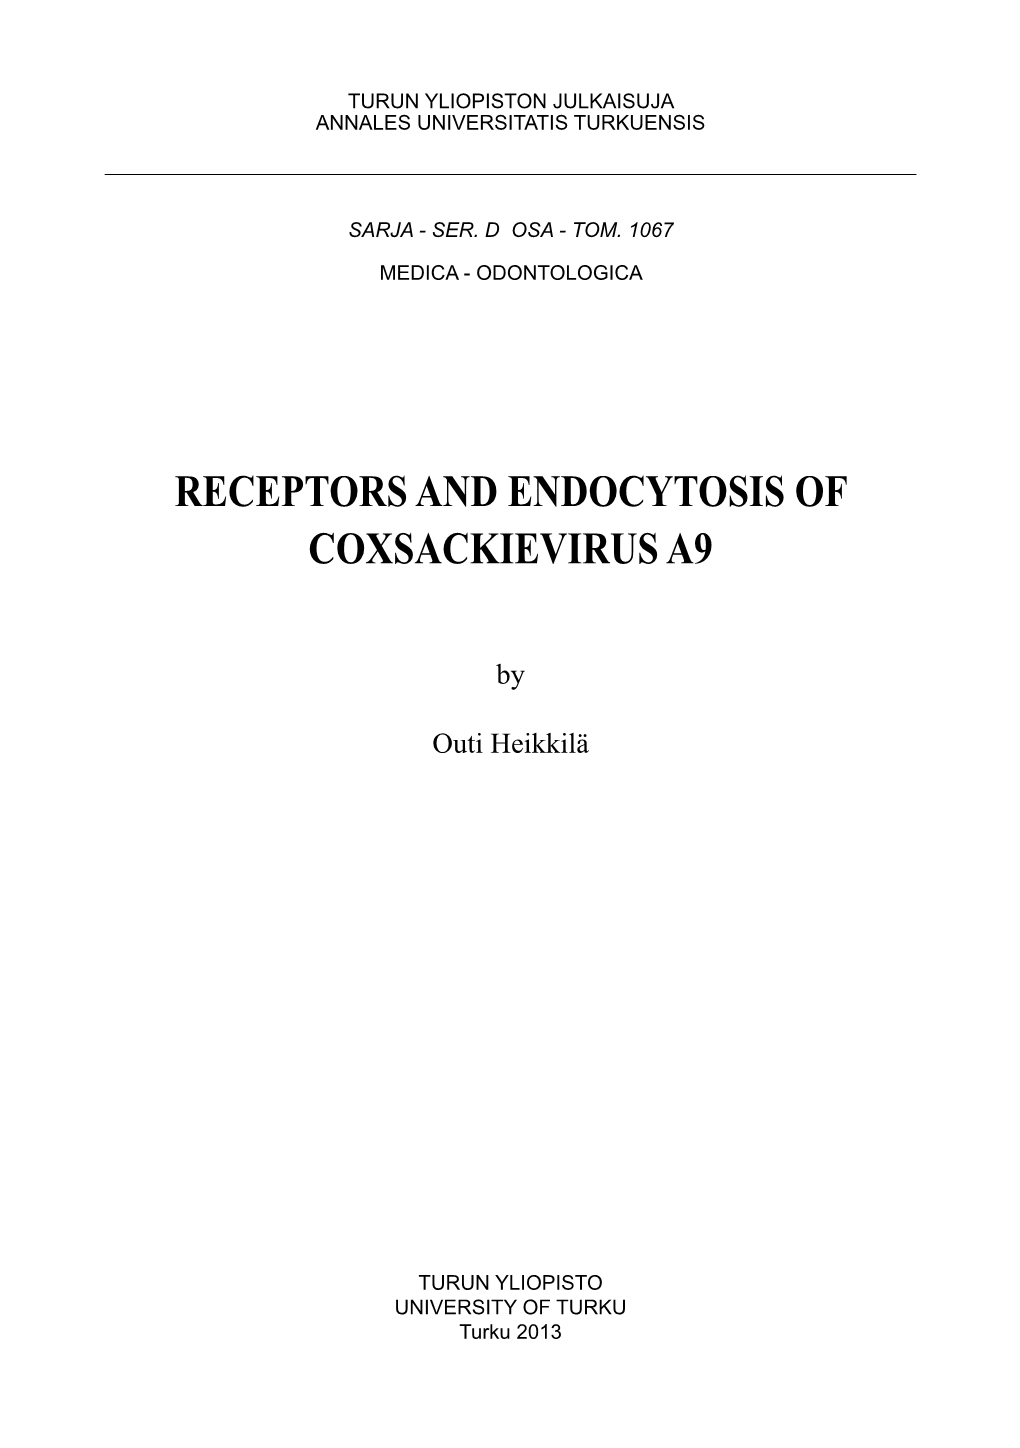 Receptors and Endocytosis of Coxsackievirus A9